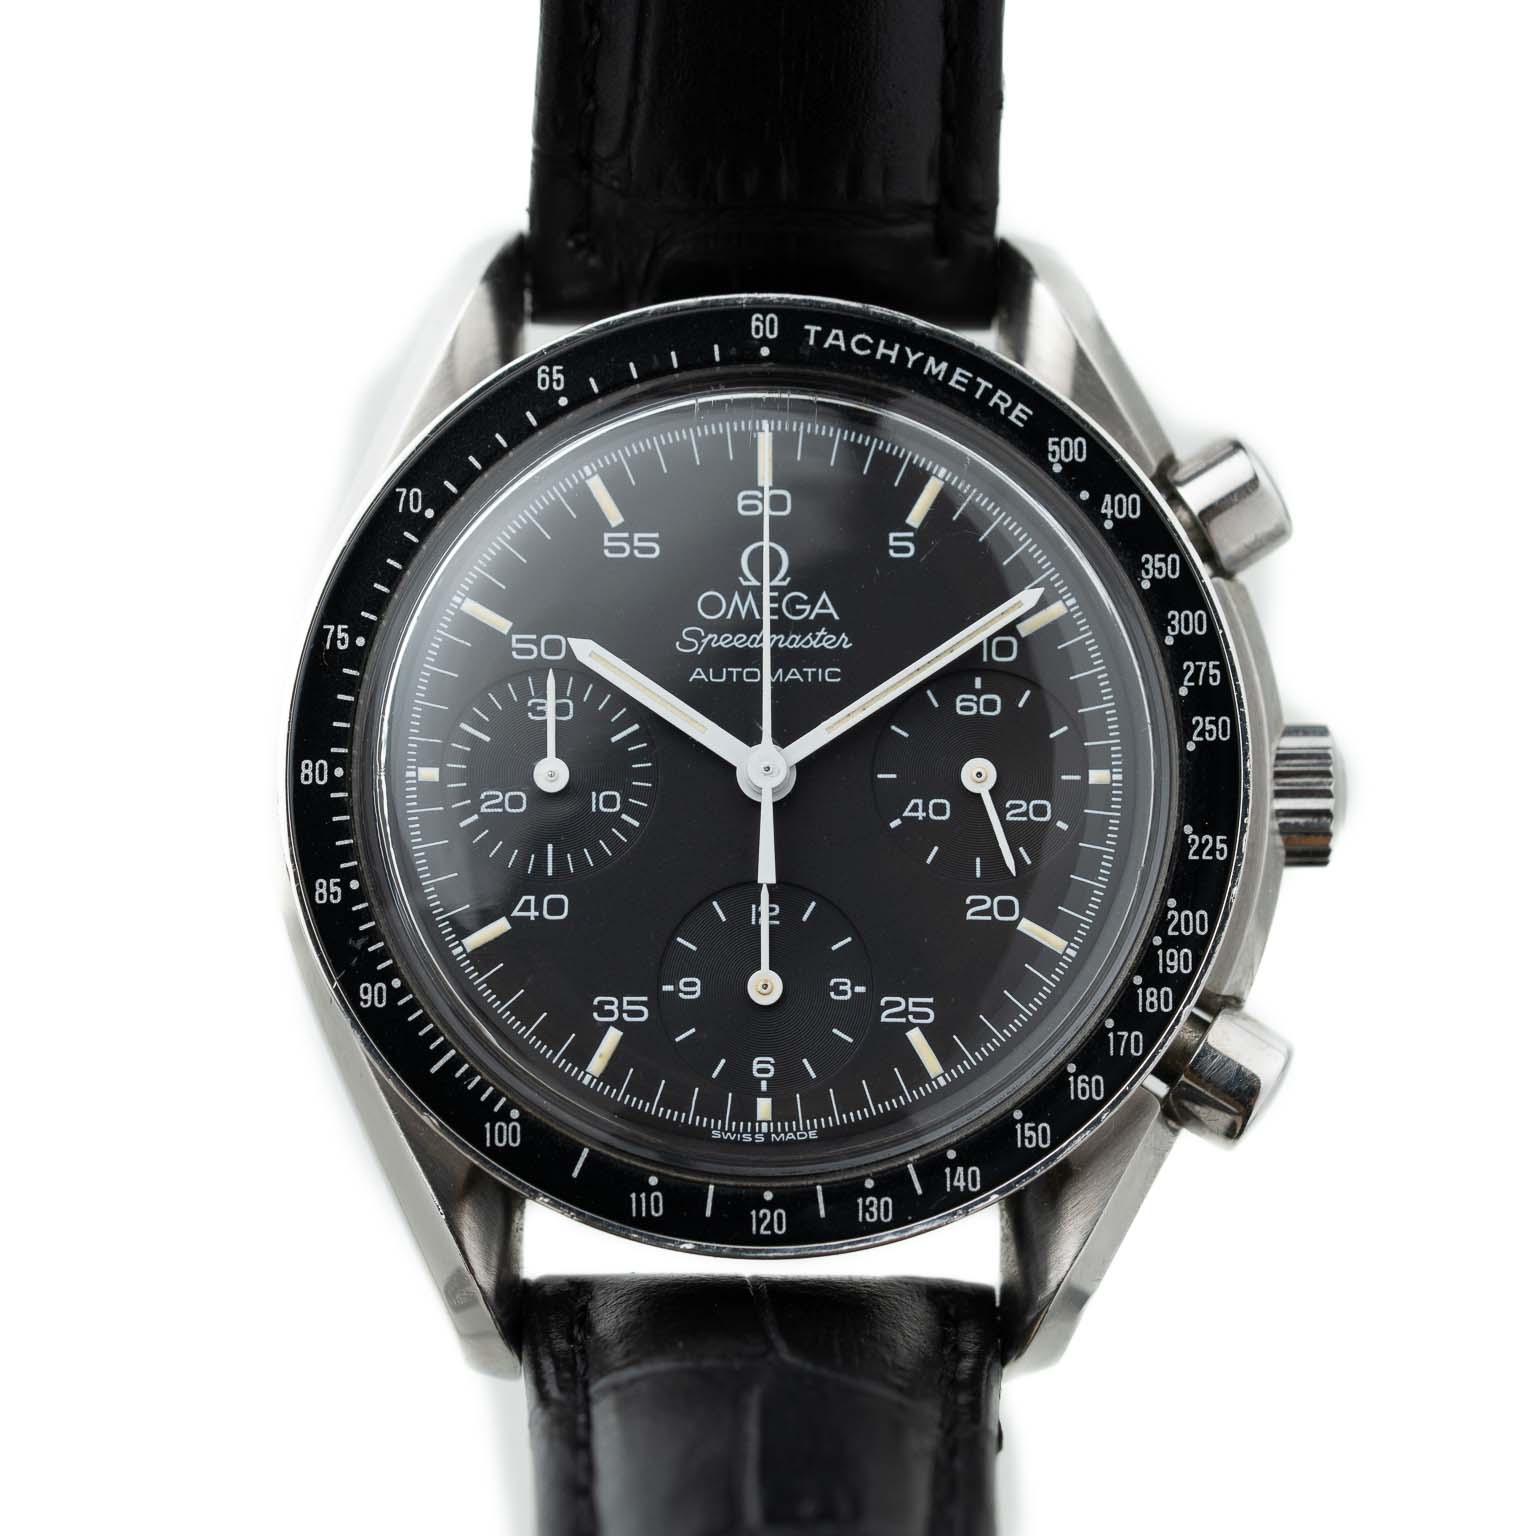 Vintage Omega Speedmaster Reduced black dial 3510.50.00 from 1999 watch front